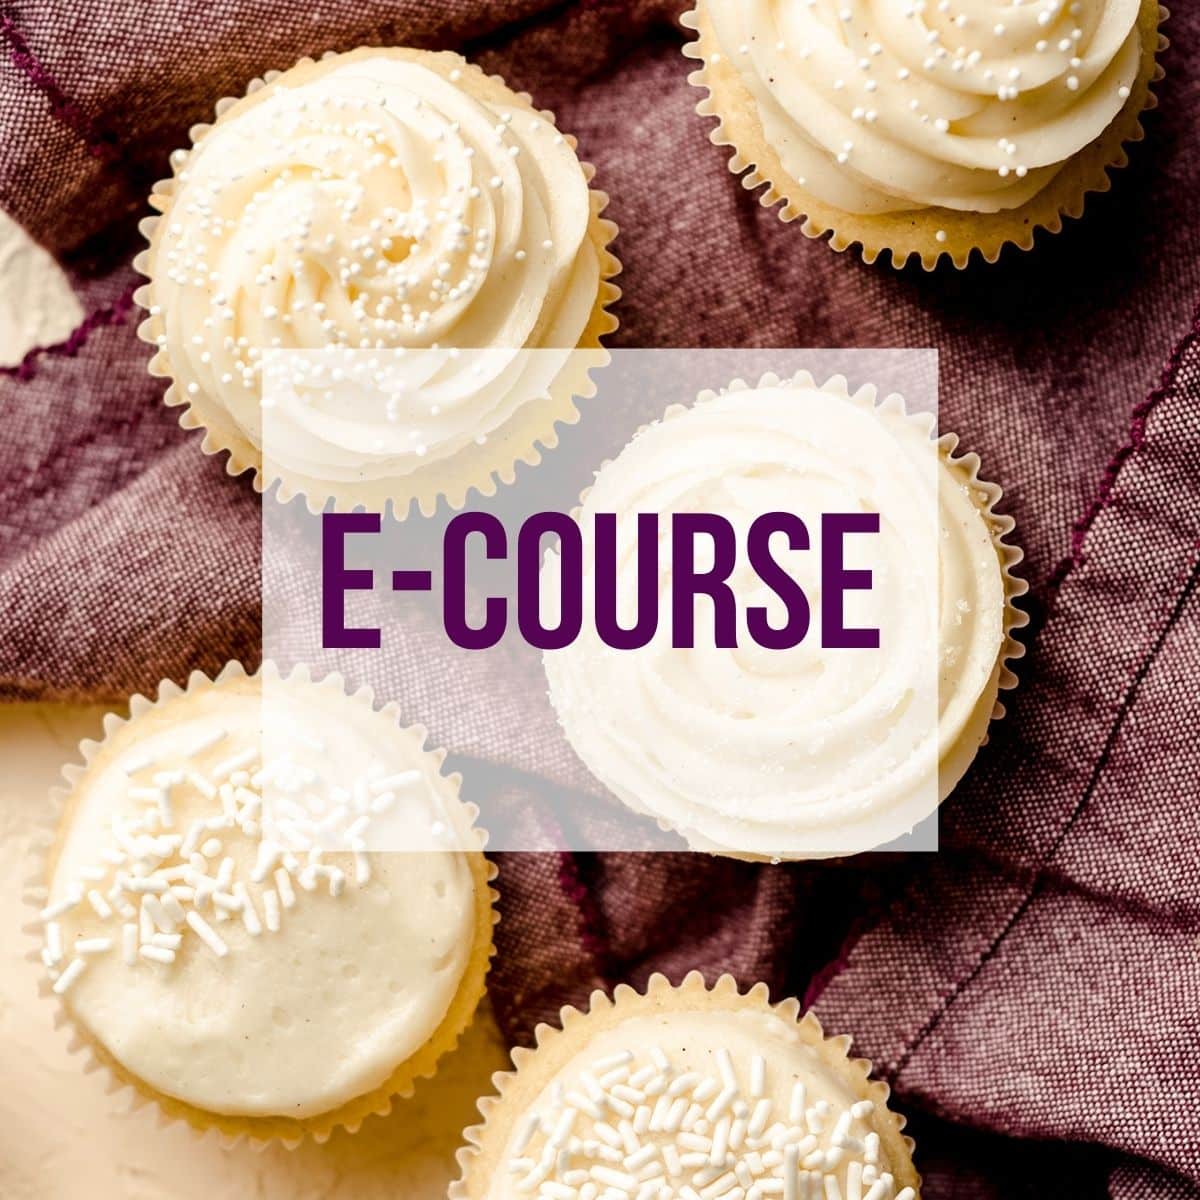 photo of cupcakes with text overlay